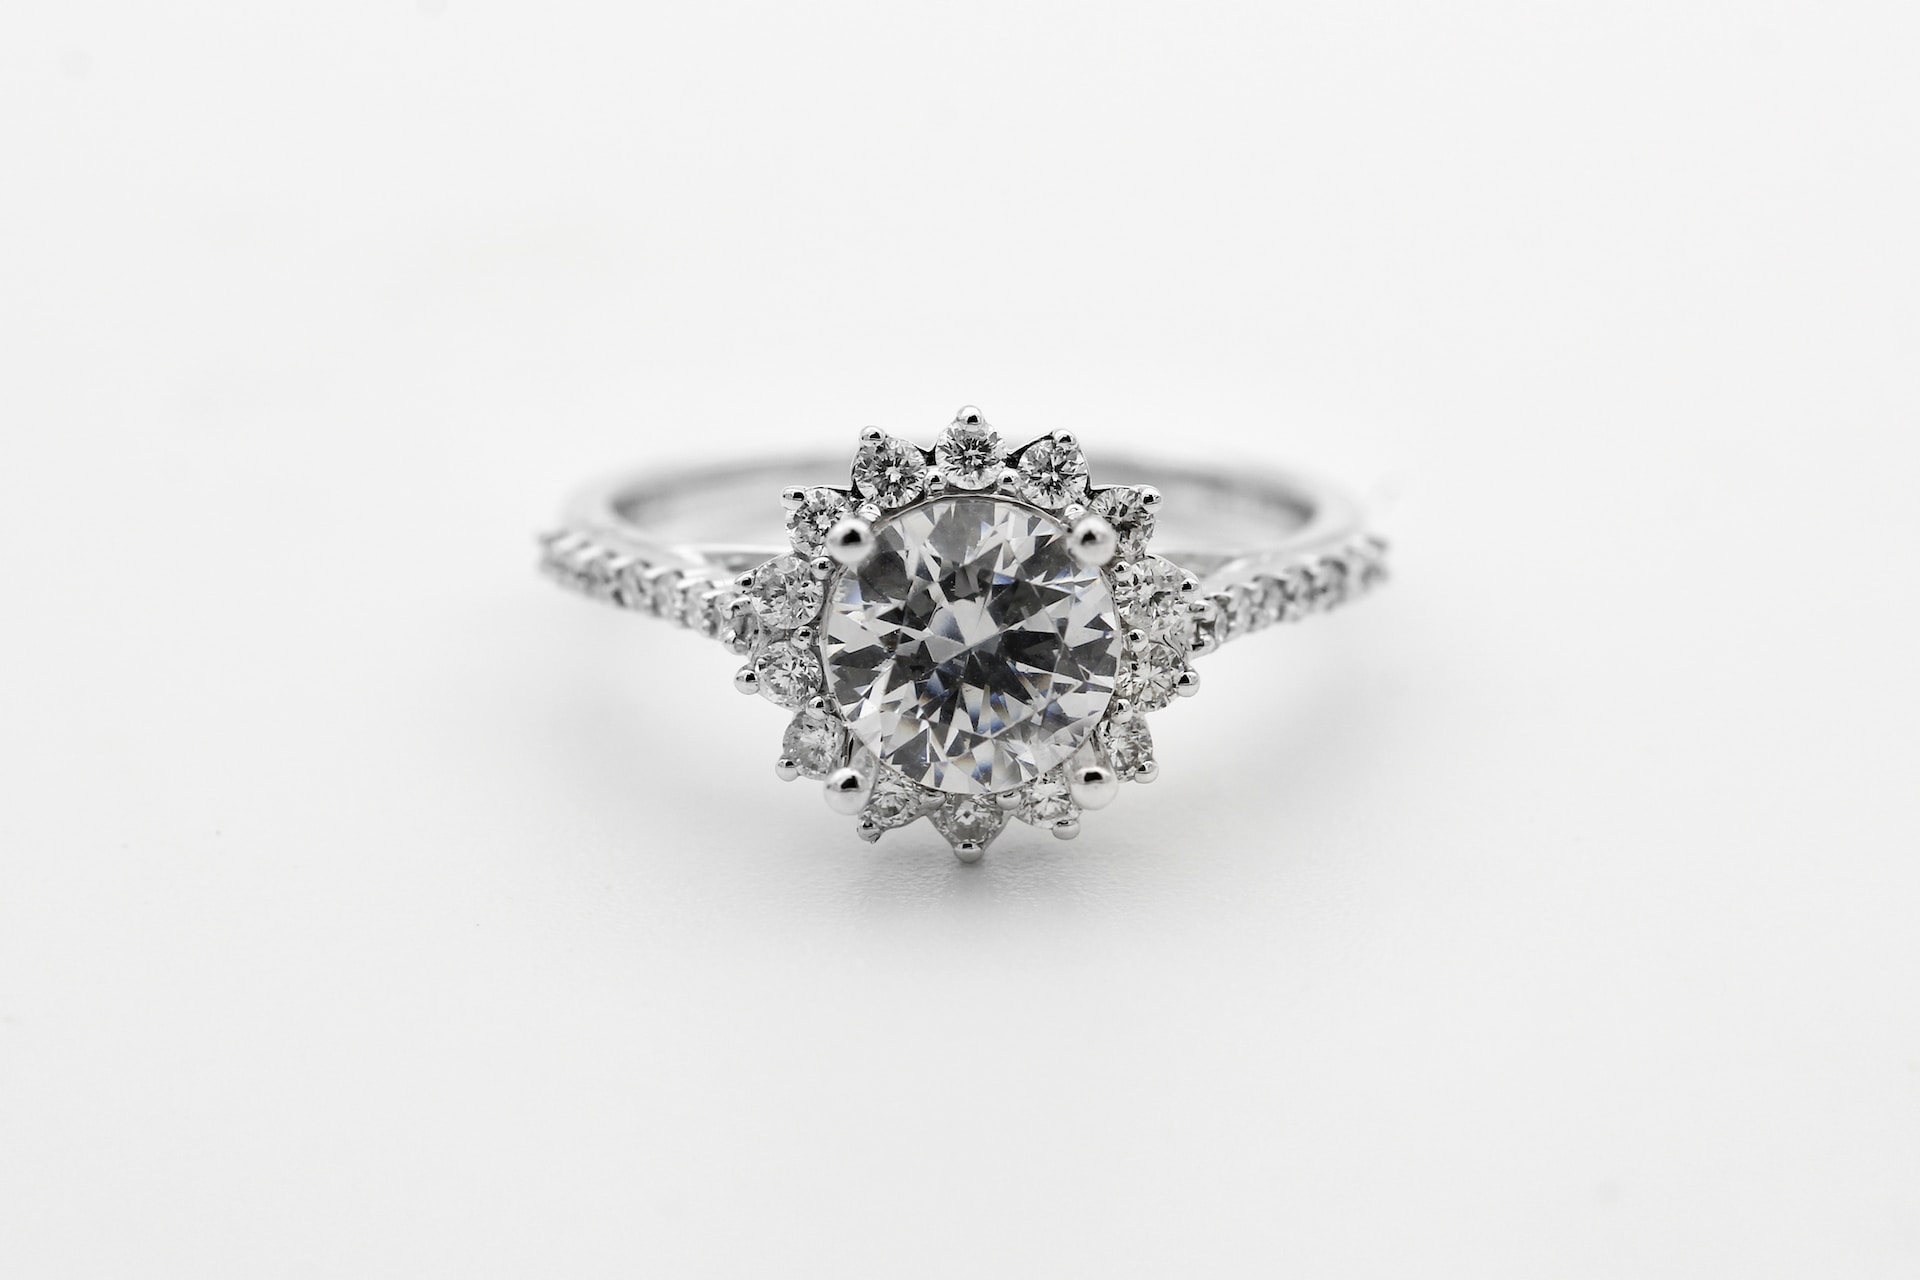 a silver engagement ring featuring a round cut center diamond and a floral inspired halo